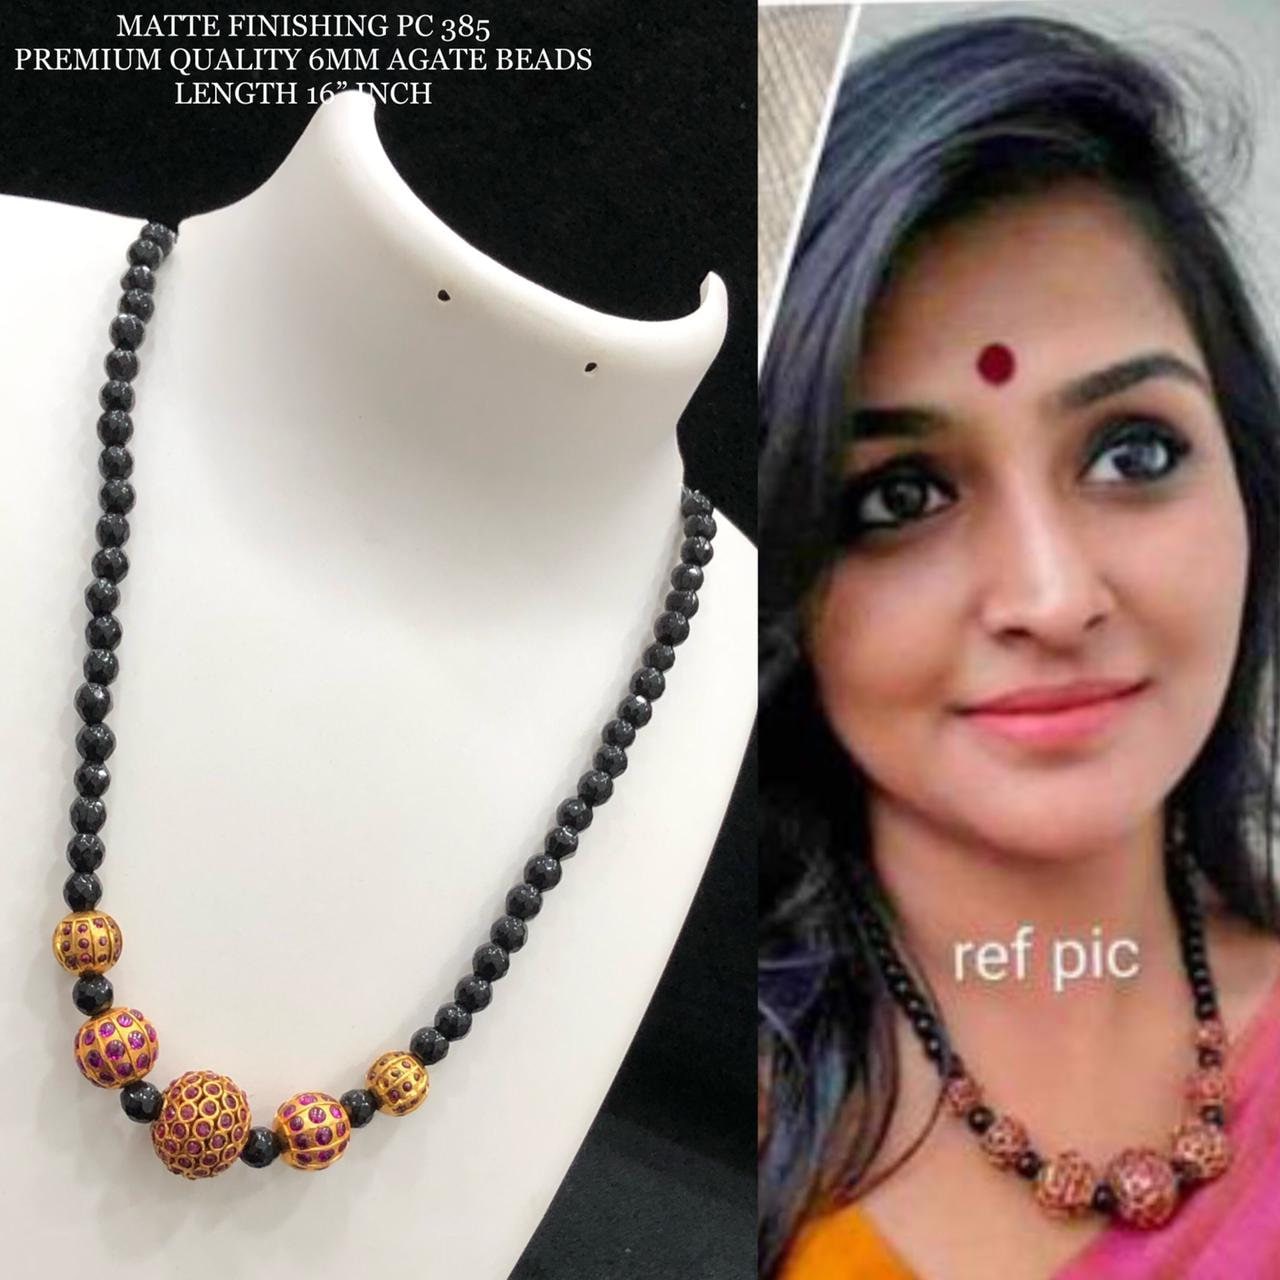 Clearance / SALE - Premium quality 6mm agate beads necklace - matte finish necklace - indian necklace